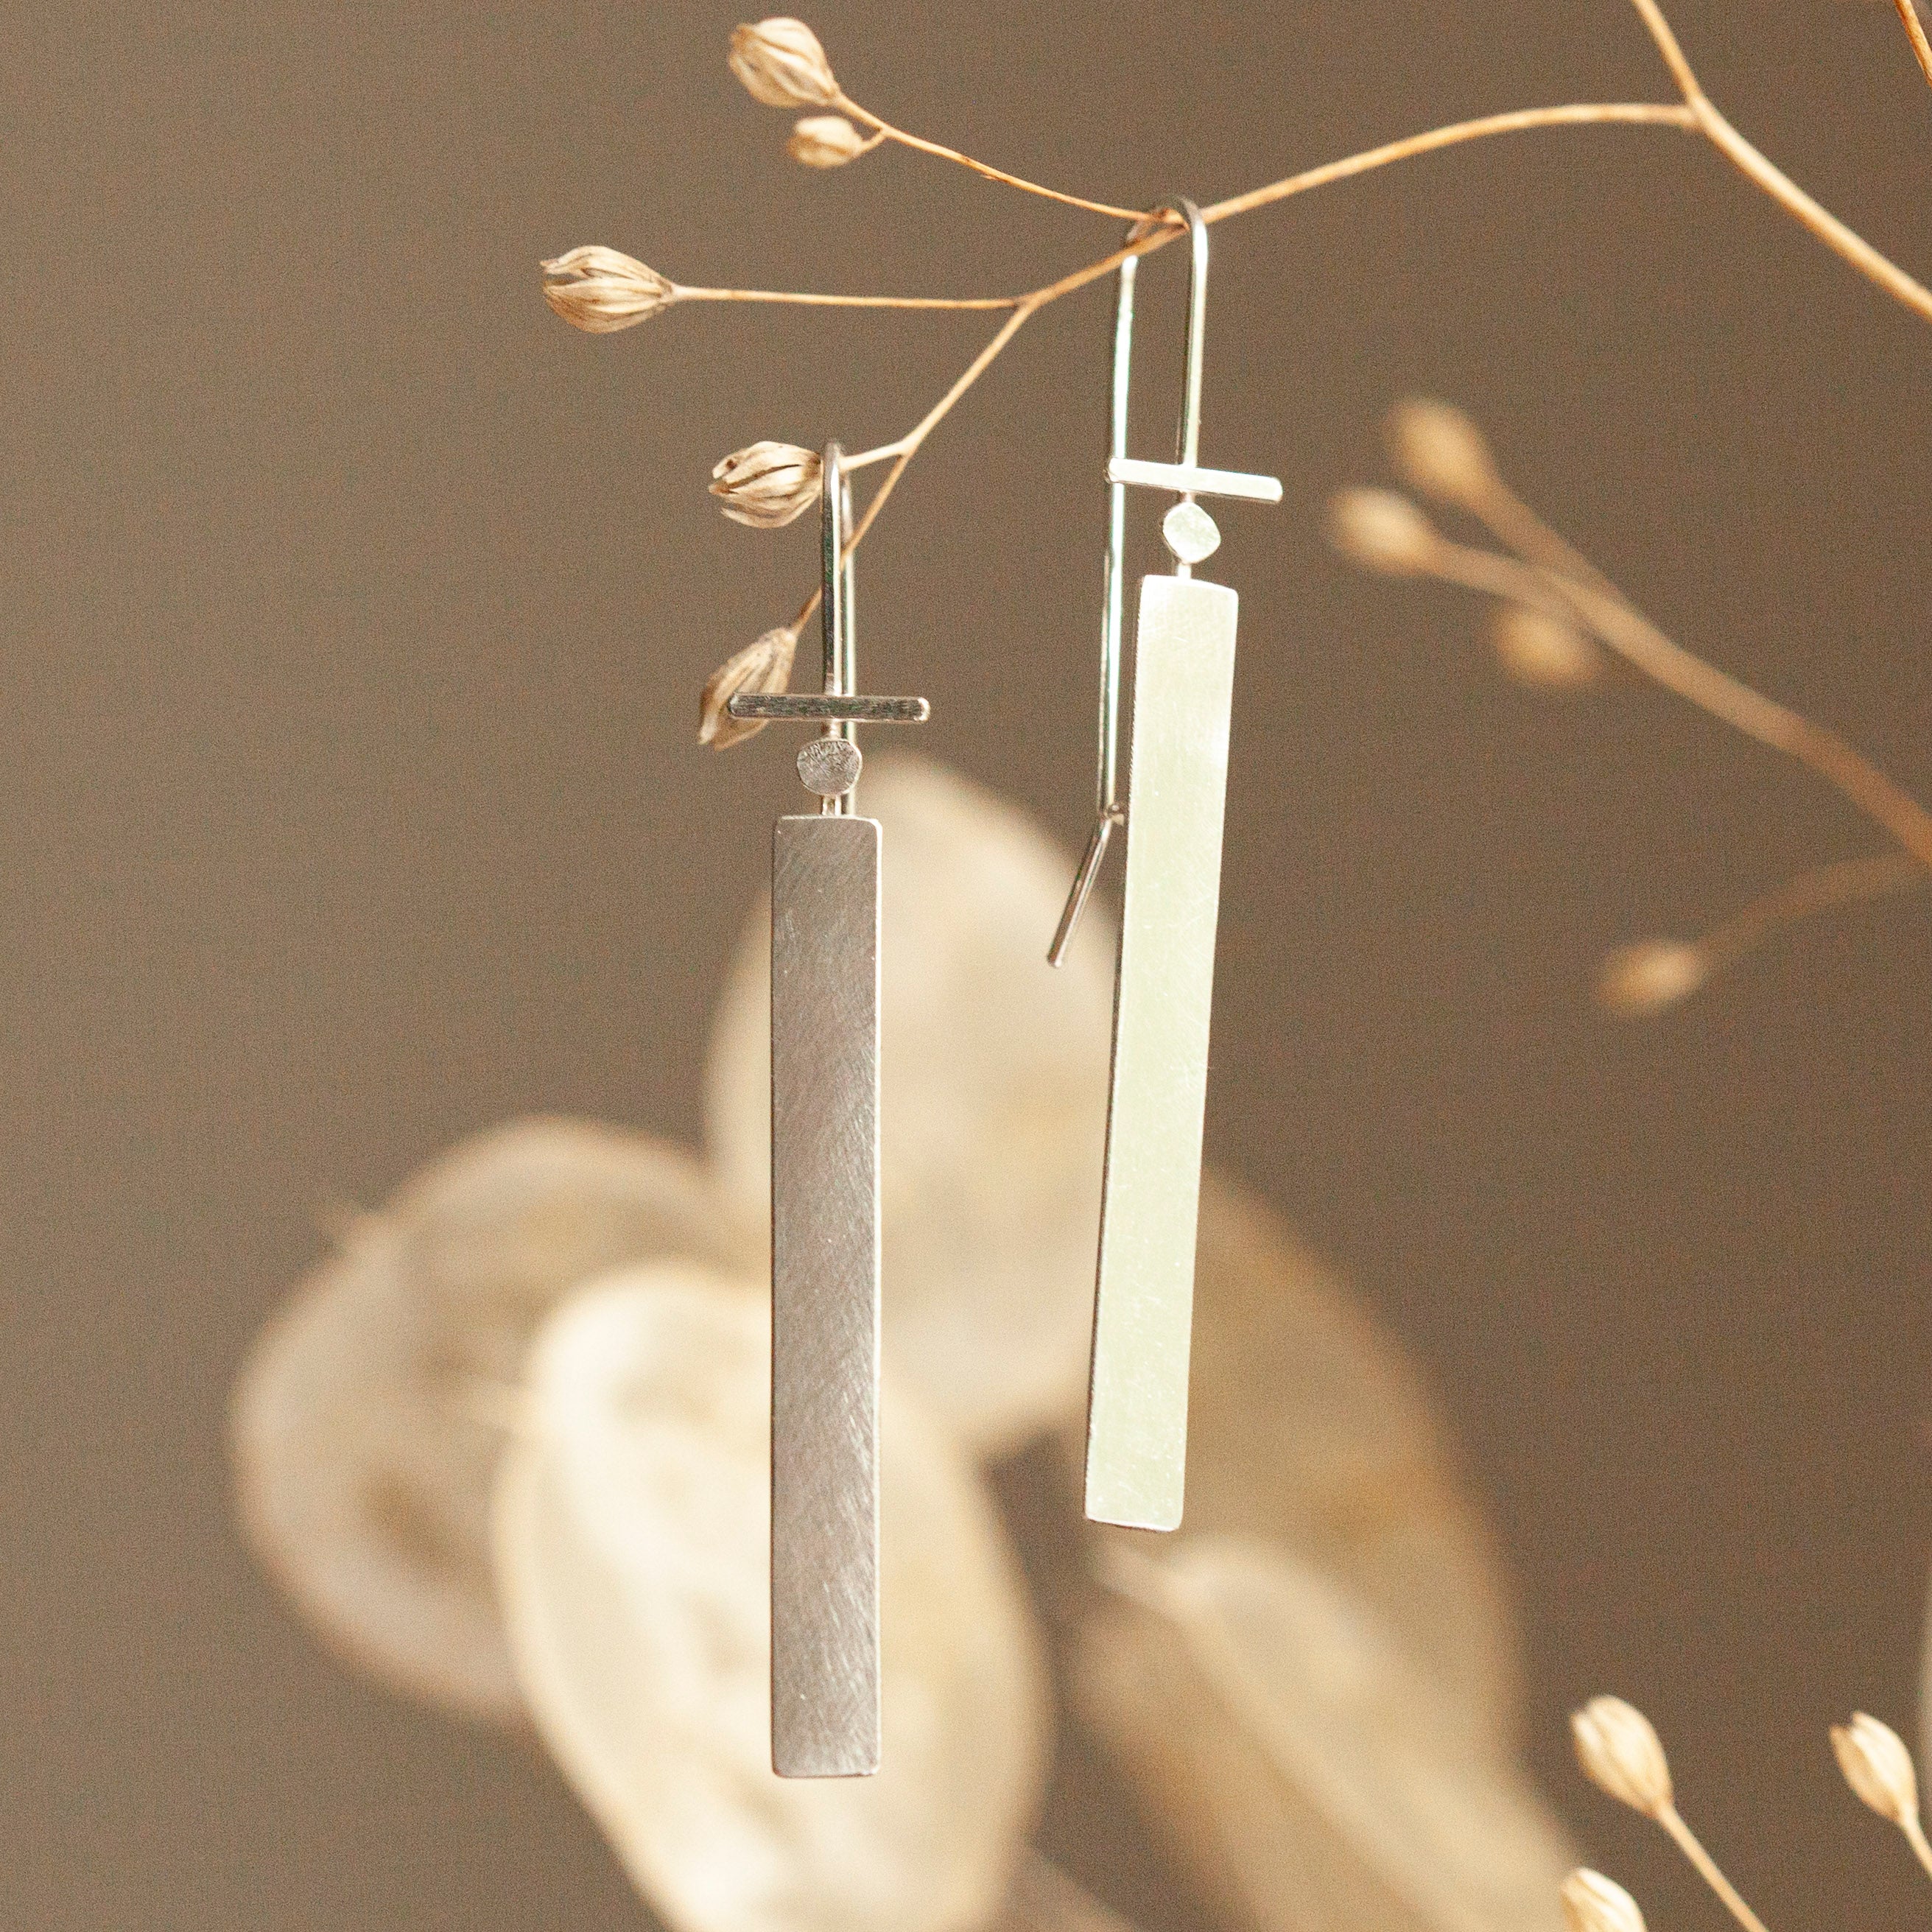 Long silver earrings    (made to order)